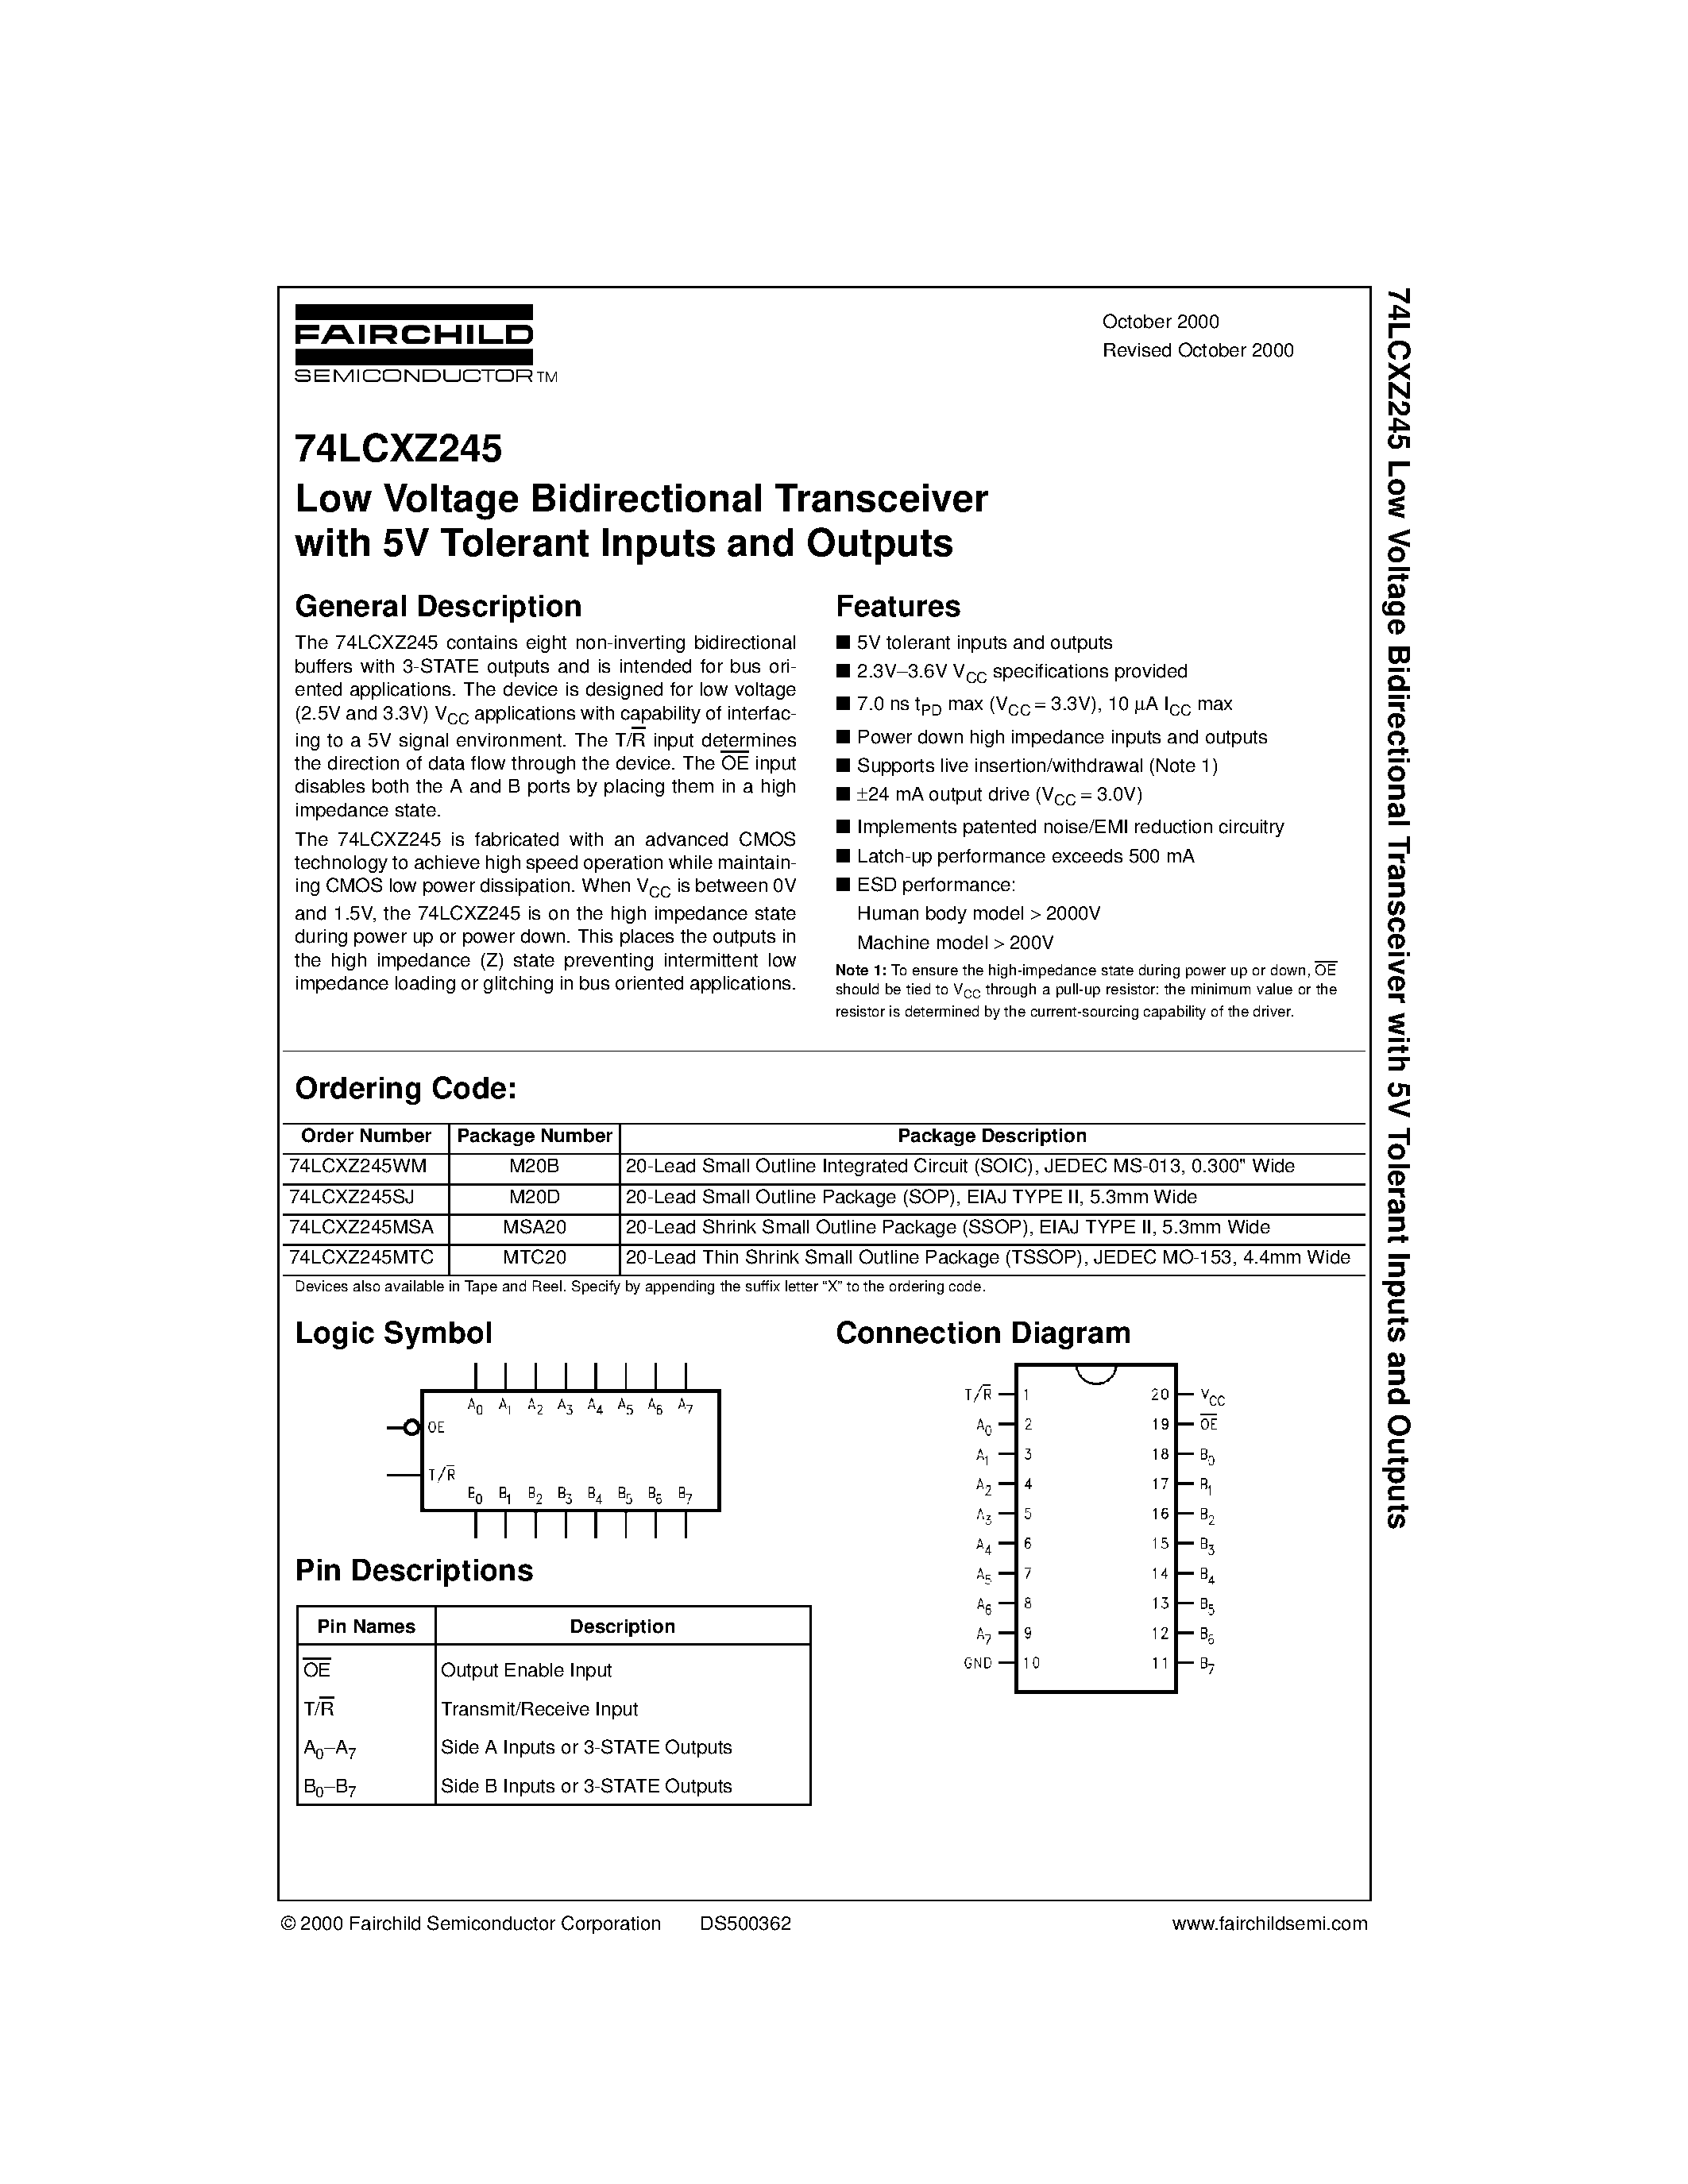 Datasheet 74LCXZ245MTC - Low Voltage Bidirectional Transceiver with 5V Tolerant Inputs and Outputs page 1